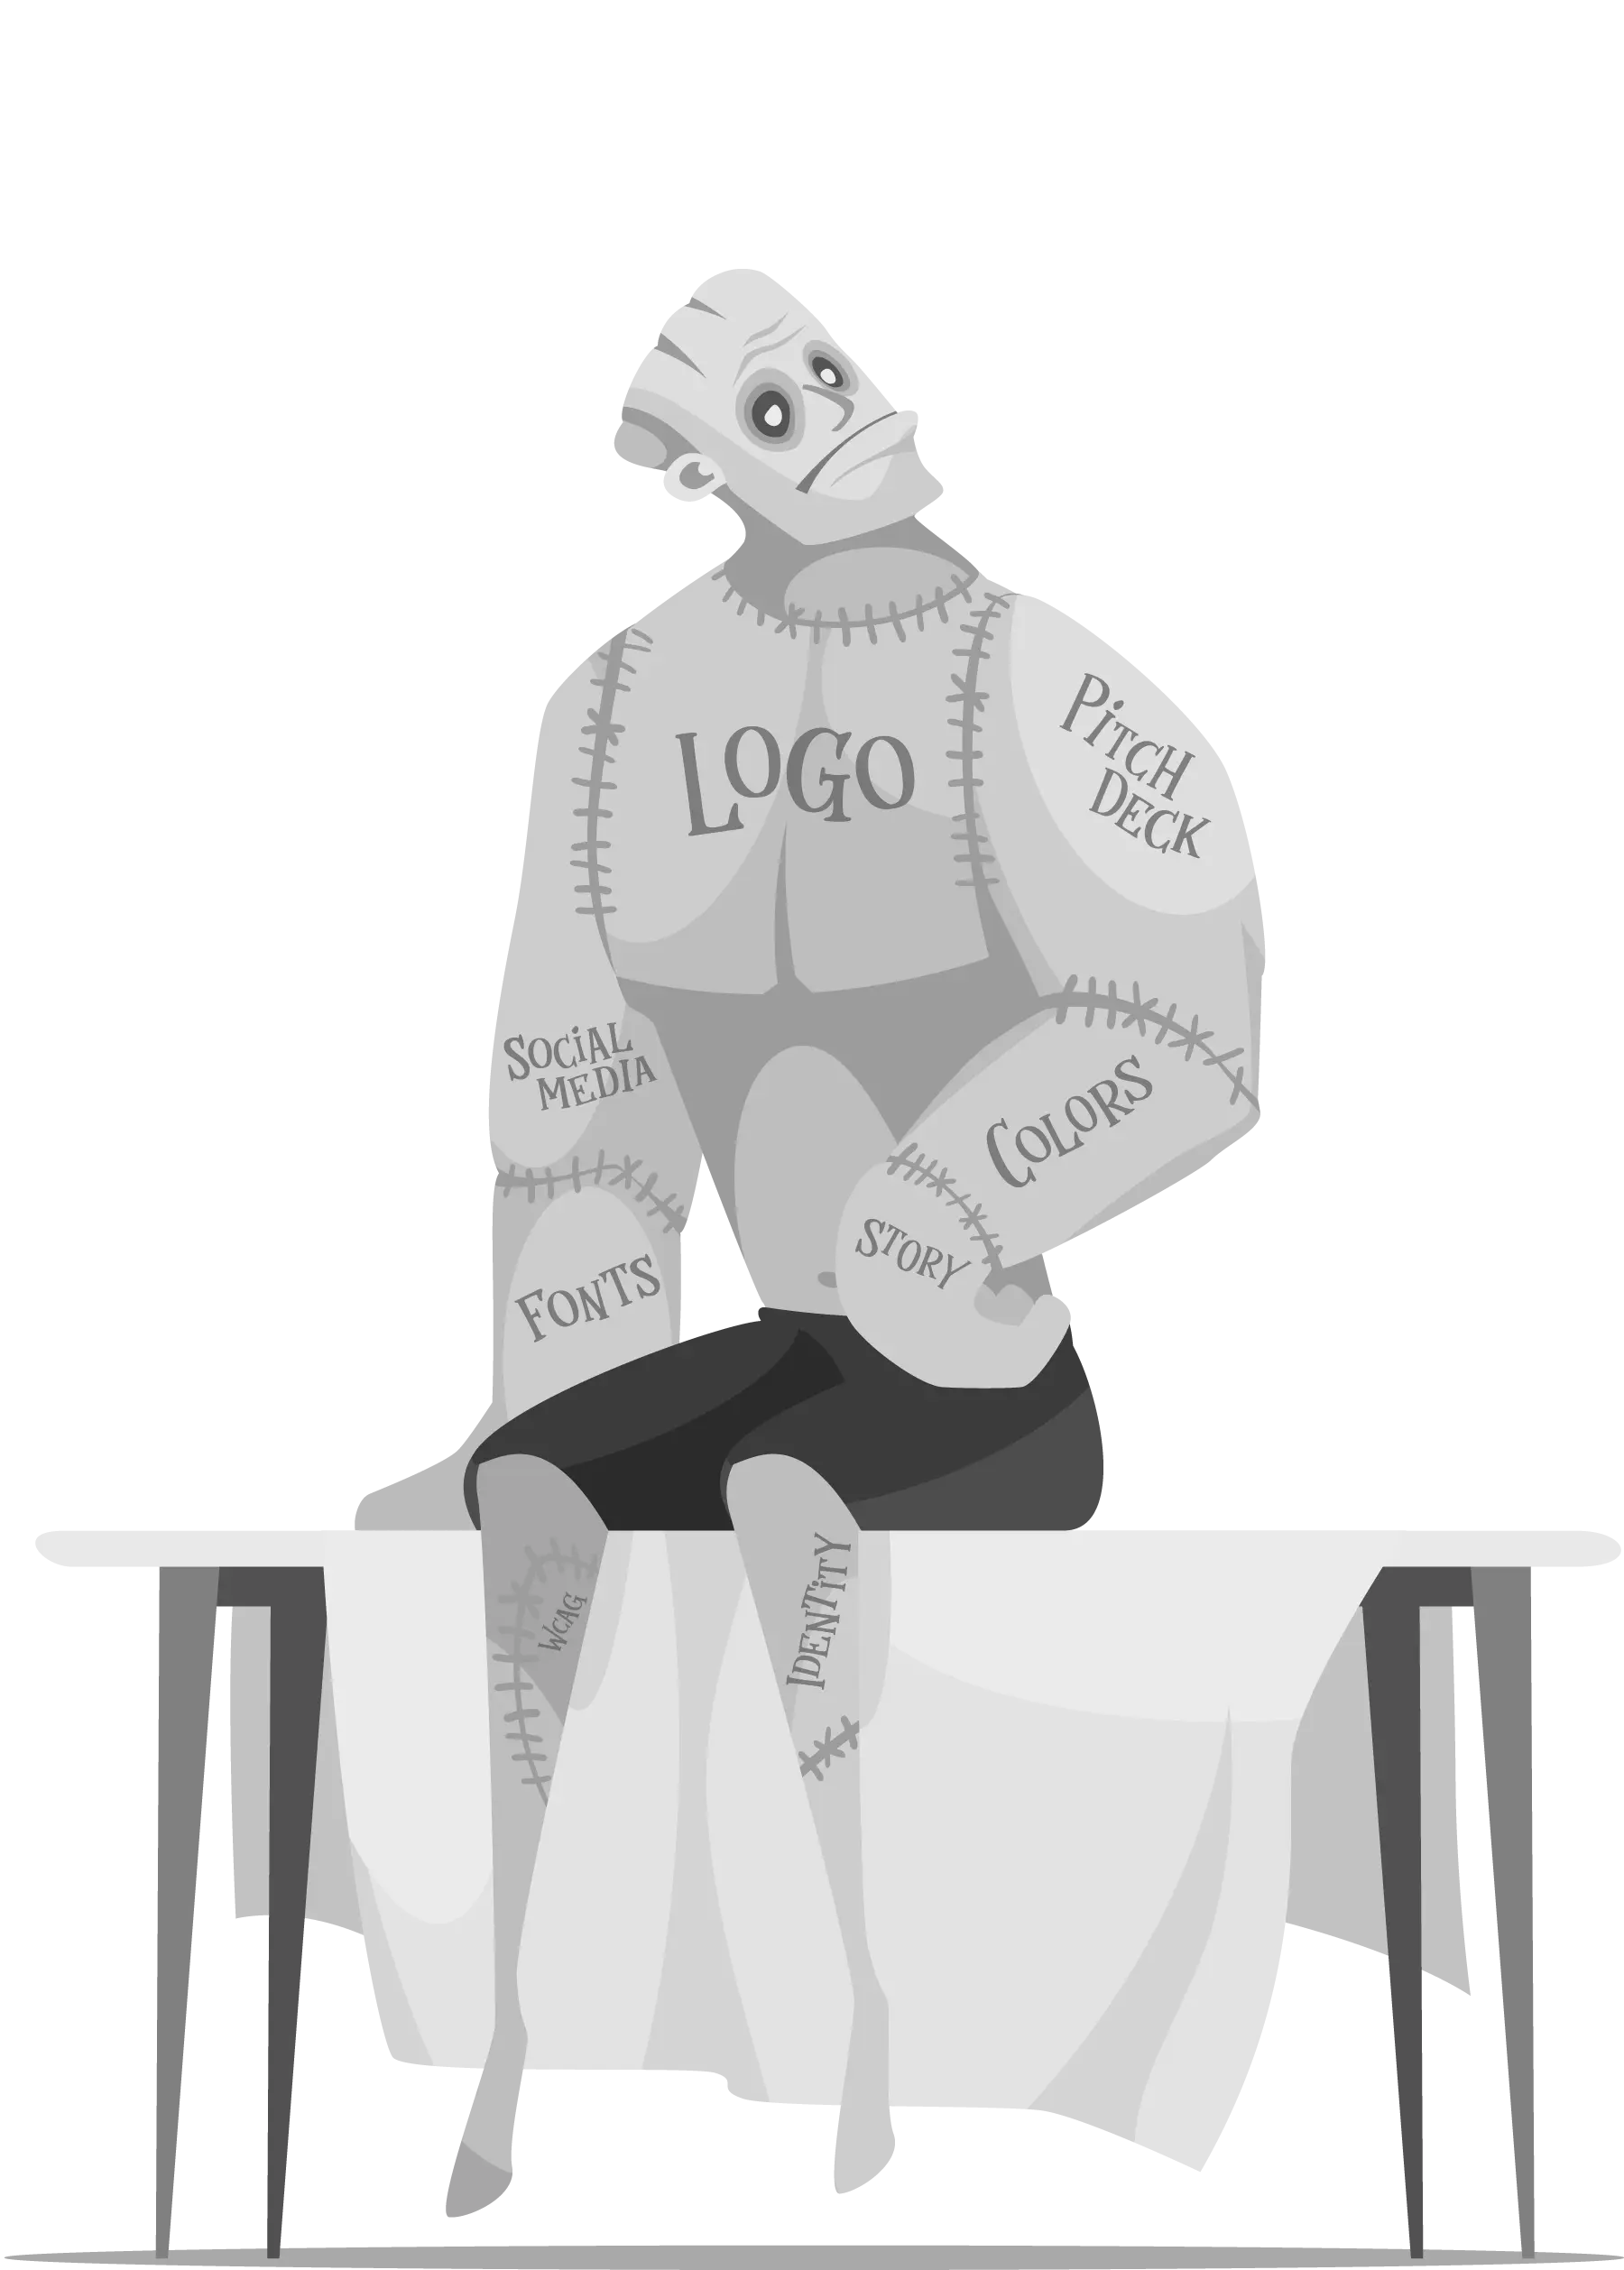 A grayscale illustration of Frankenstein's monster, with his body made from many disparate parts stitched together. Except this is Frankenbrand! Each part of his body is a different part of a startup's marketing strategy. Across his chest is written "Logo". His left bicep says "Pitch Deck", his forearm says "Colors". Across all his various parts read, "Social Media", "Fonts", "Story", "WCAG", "Identity", etc. This illustrates the common trap of startup marketing; when you bounce from gig designers to experts, copywriters to pitch specialists, and back again, it's up to the Founder to stitch all of these parts together into something halfway coherent & consistent. It's a confusing, frustrating, expensive mess! There's a better way, with Ceemo.